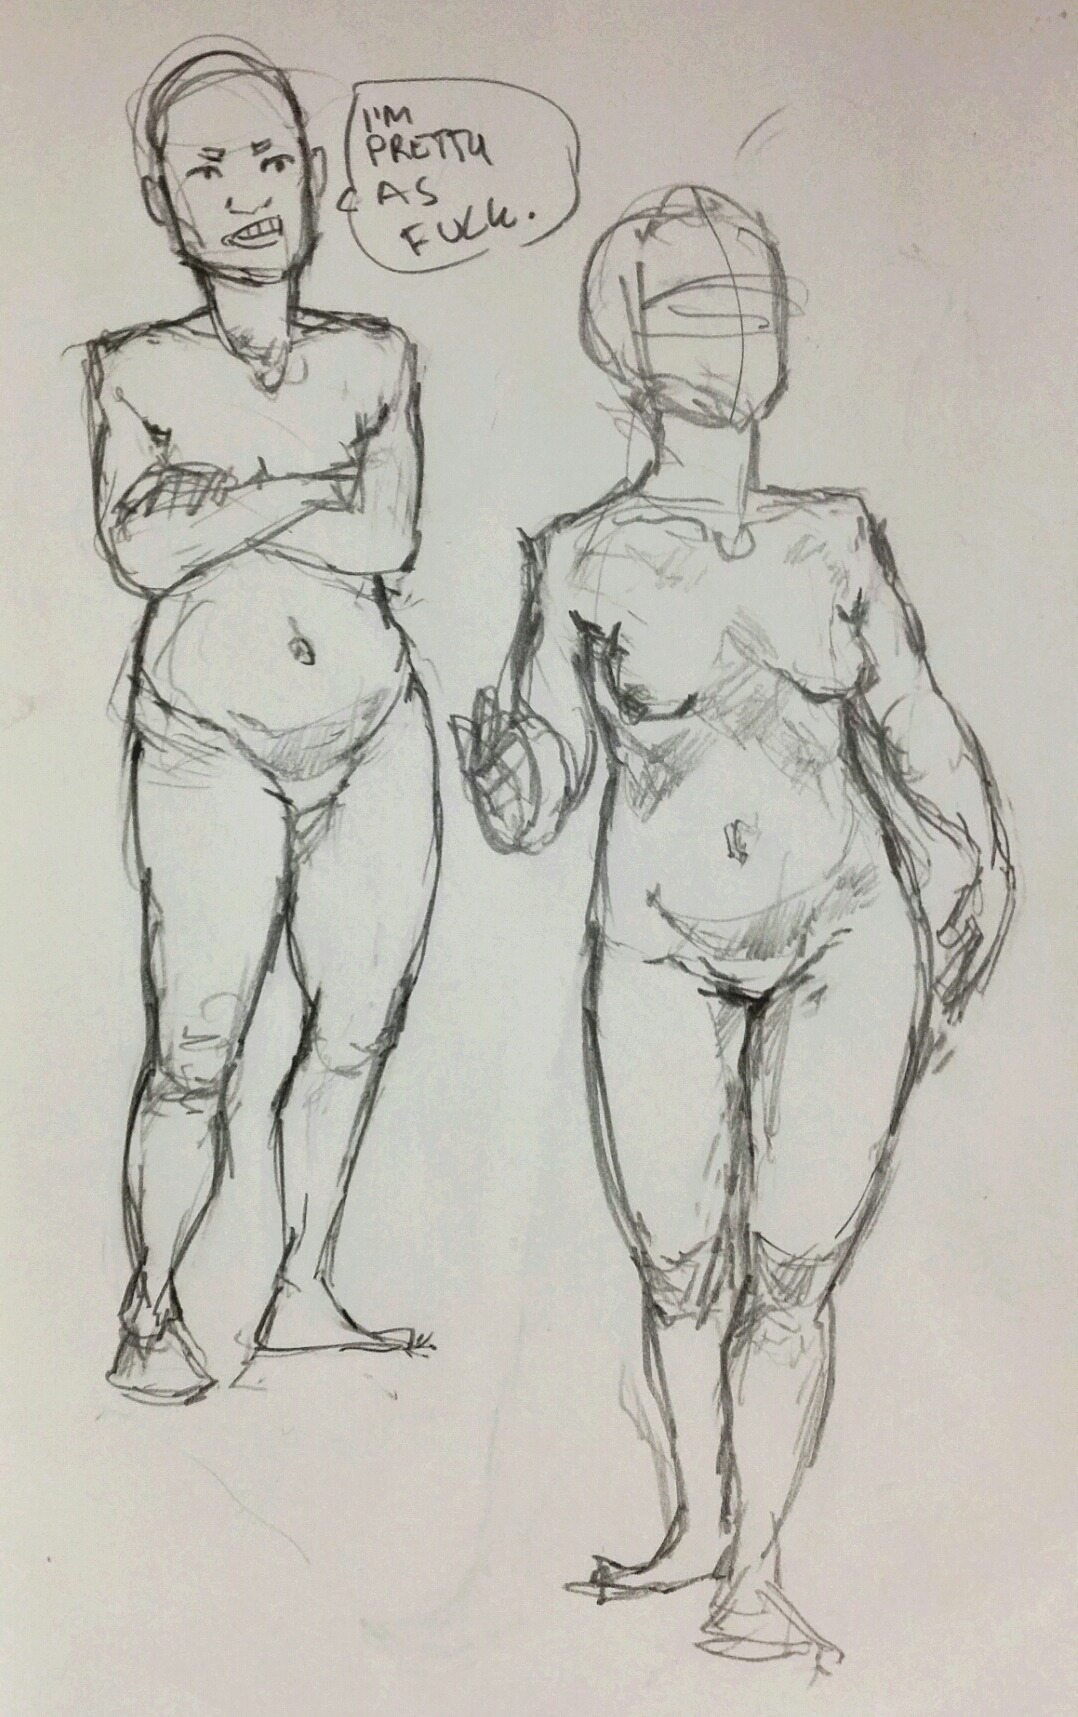 When you&rsquo;re experiencing negative feelings about how you look, draw naked